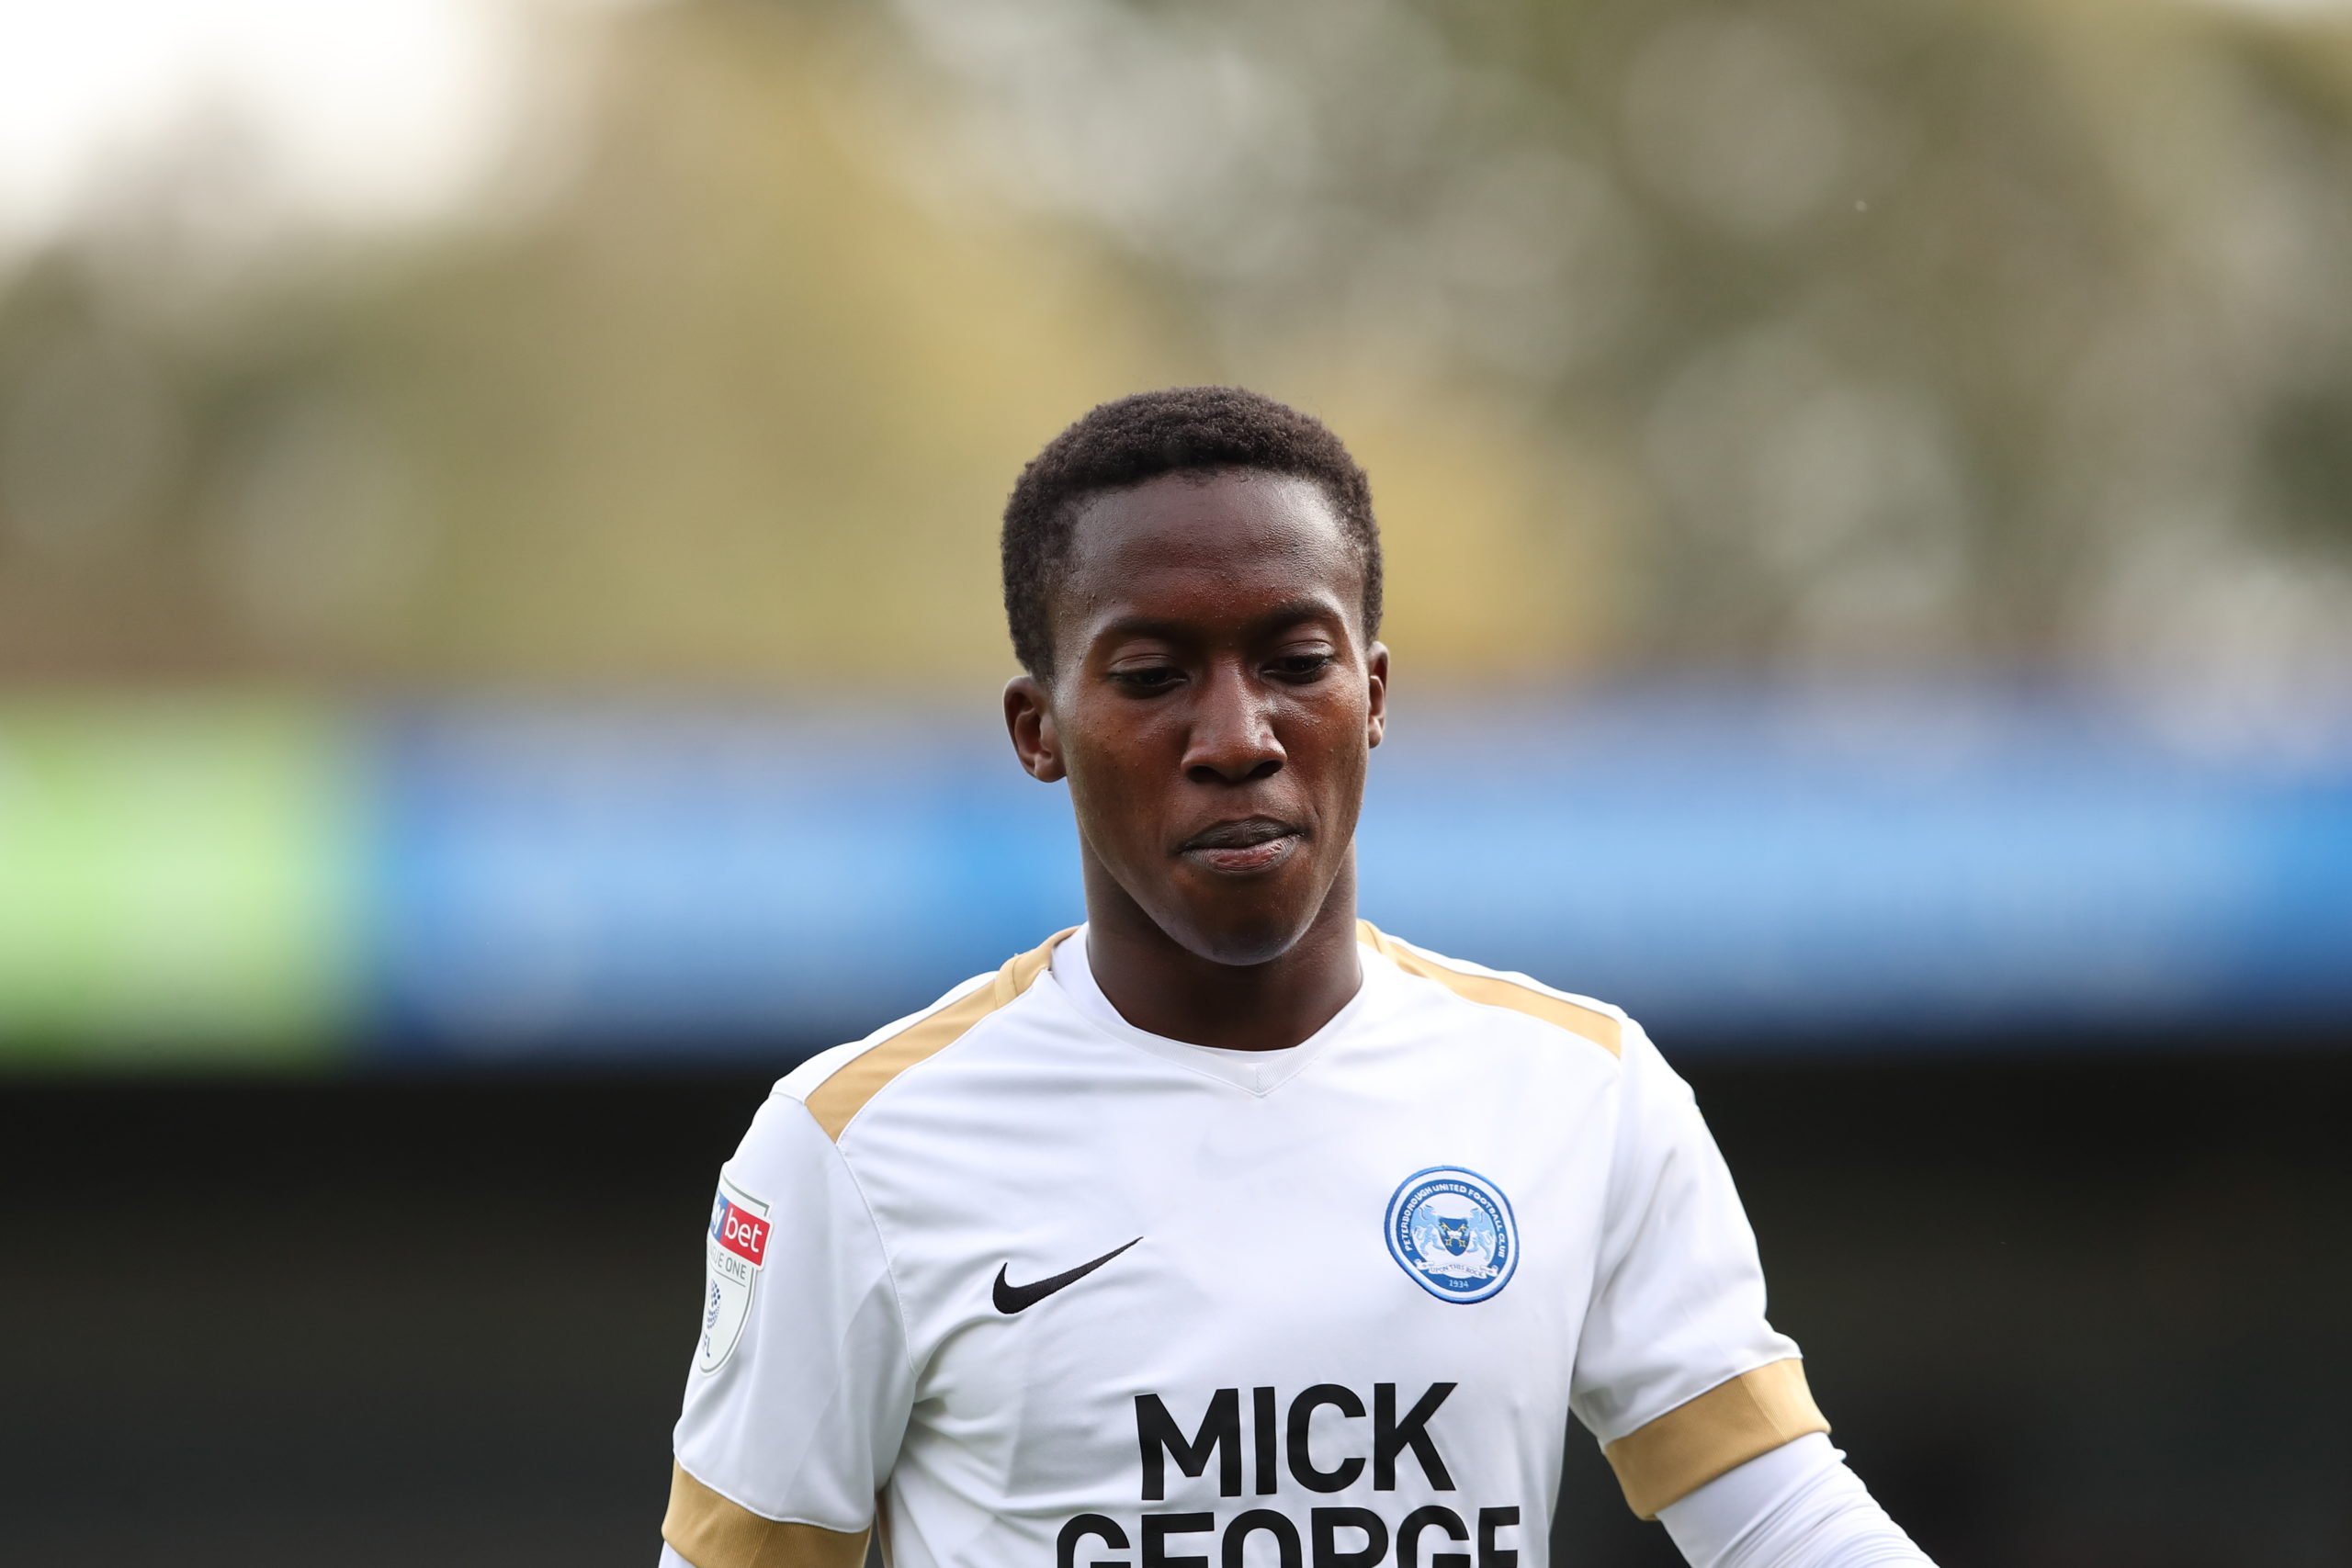 Celtic-linked Siriki Dembele's agent accused of "drumming up interest" by Peterborough